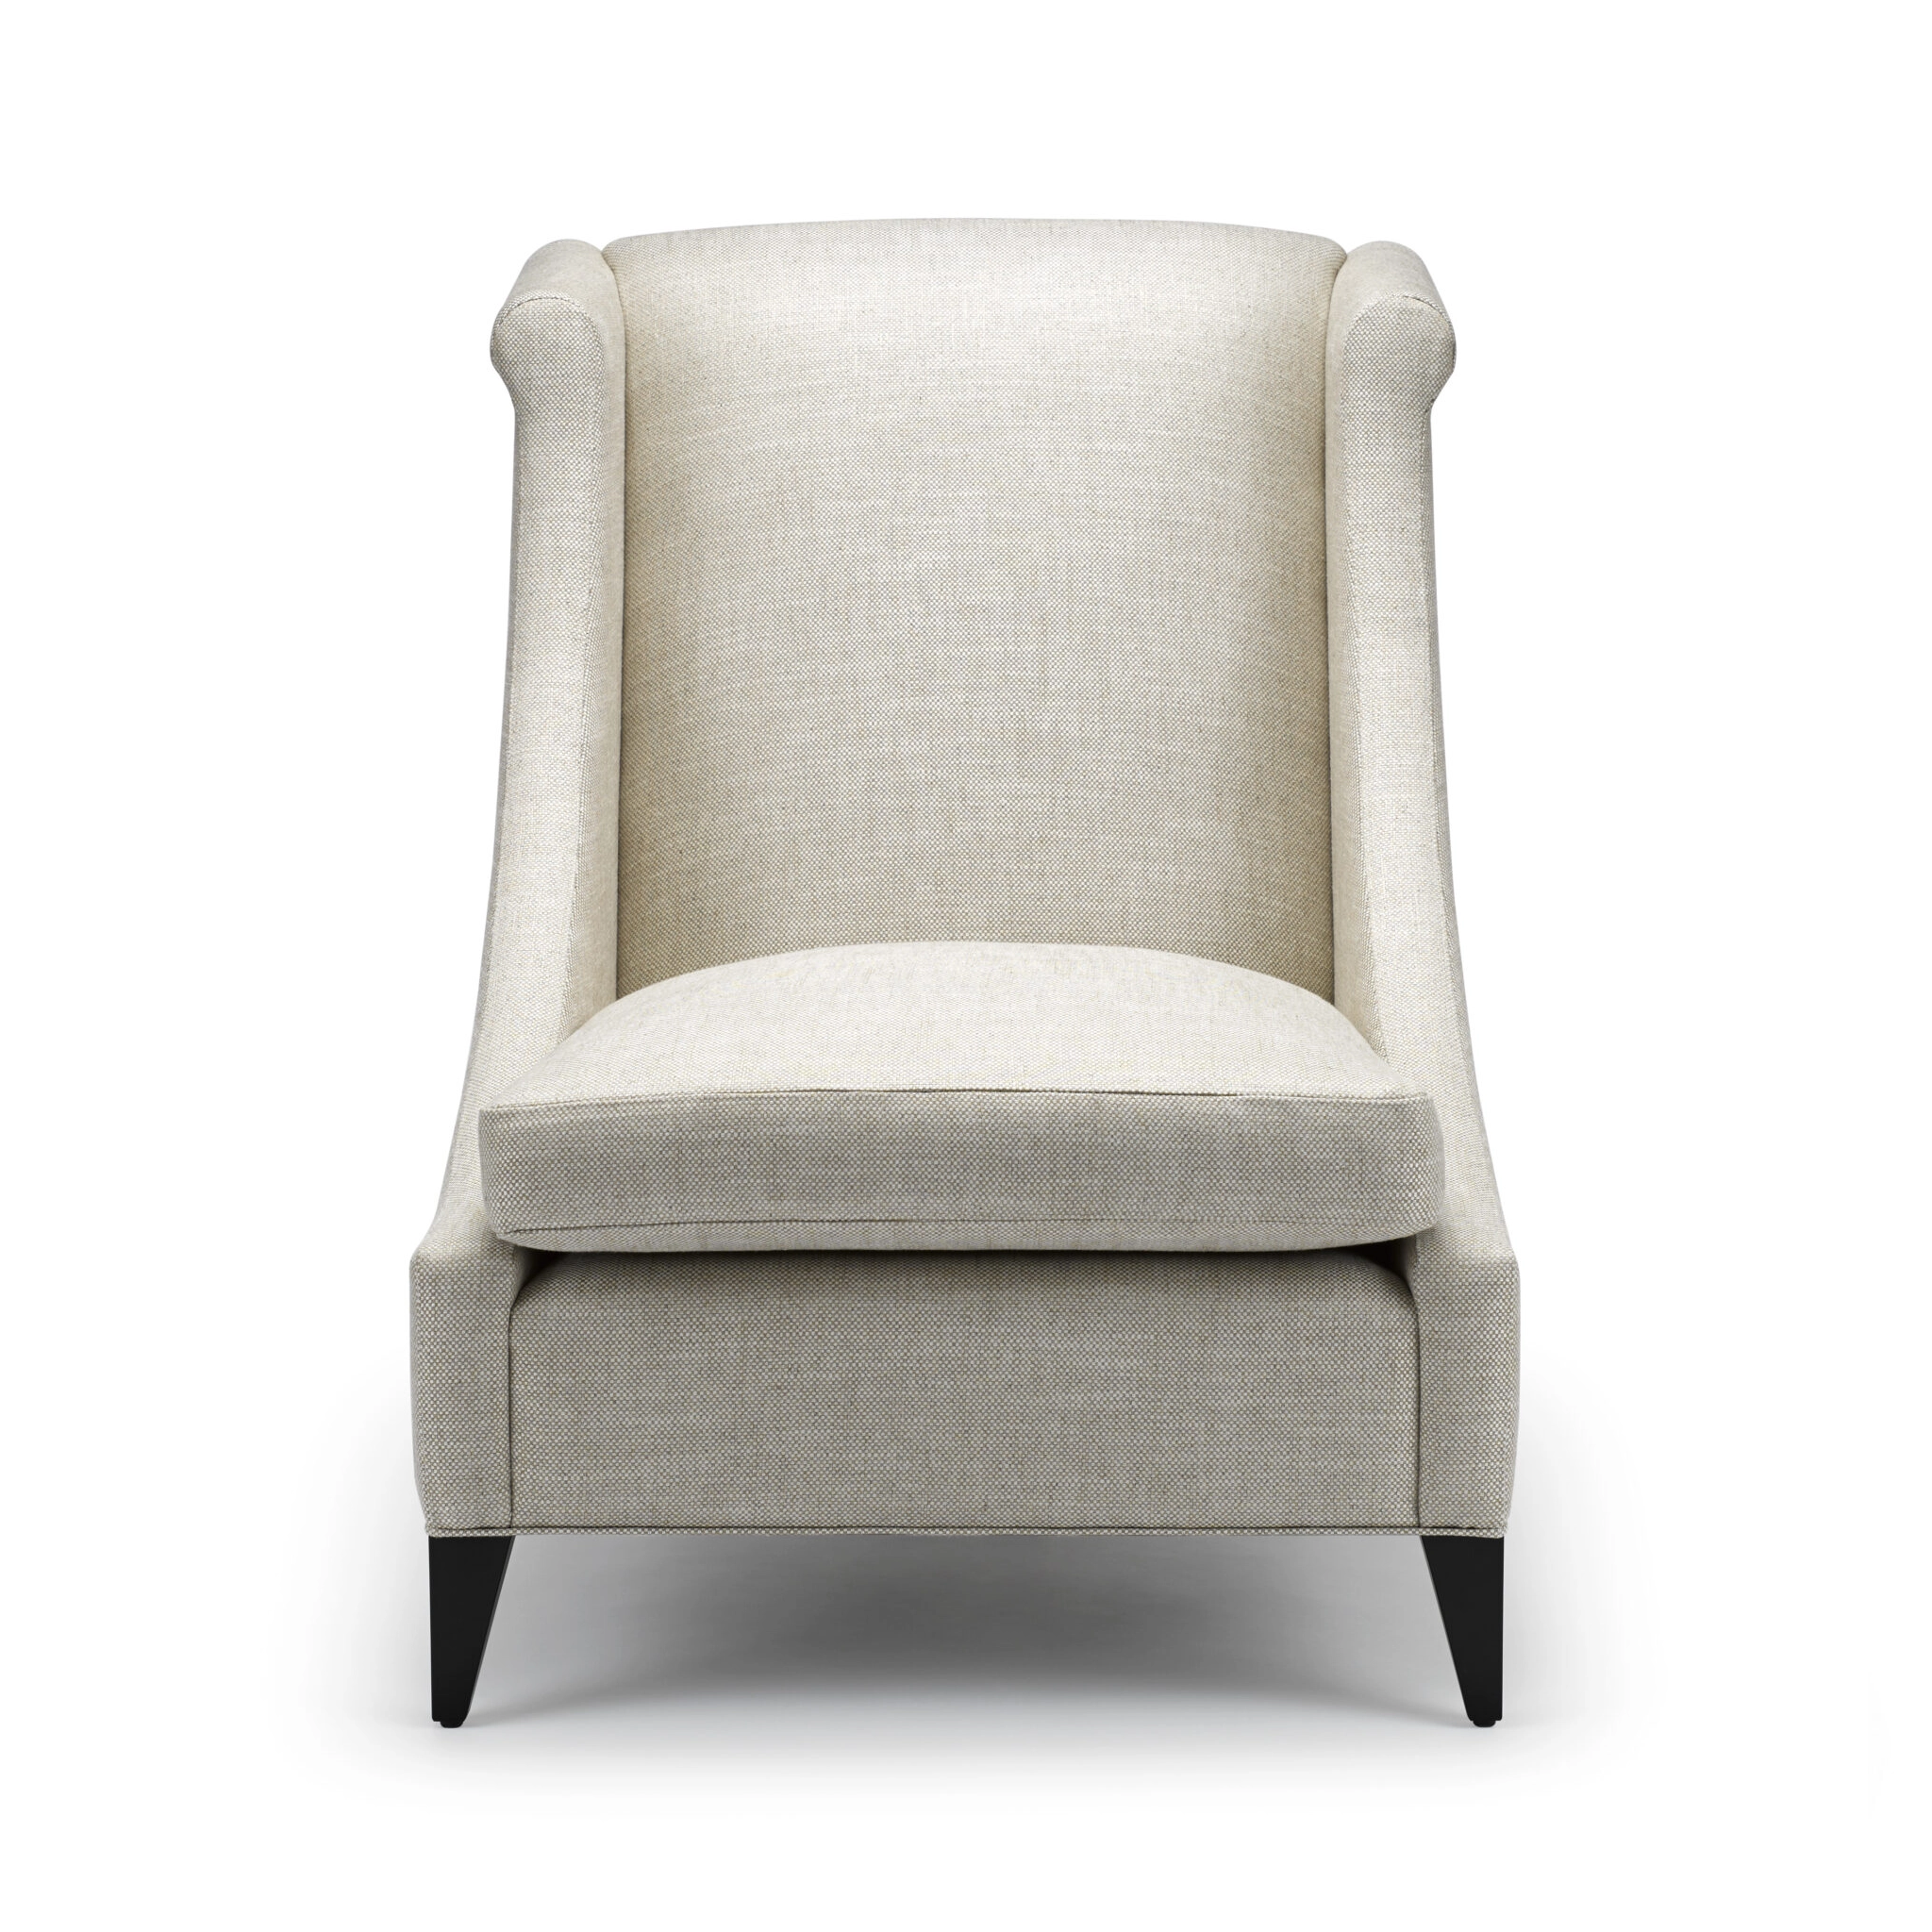 The Vegas Lounger - Shown here upholstered in Romo Delano Linen, with legs in black lacquered walnut.